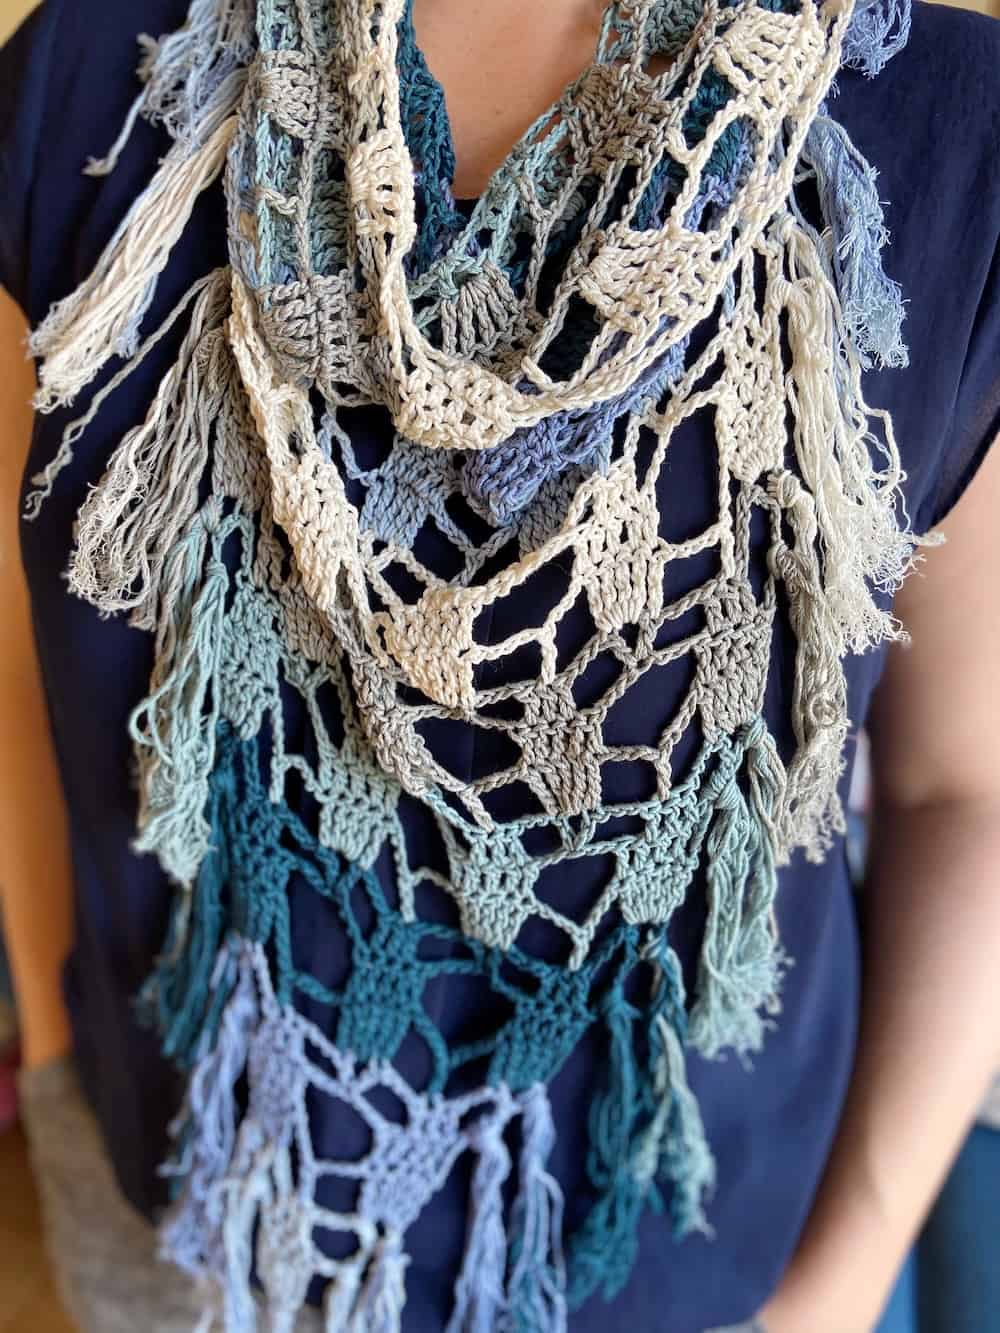 The Seaglass Bandana Scarf is a free triangular crochet scarf pattern that ends up with straight edges that you join to form a cowl part at the top. Sounds complicated?! I promise it's not. 